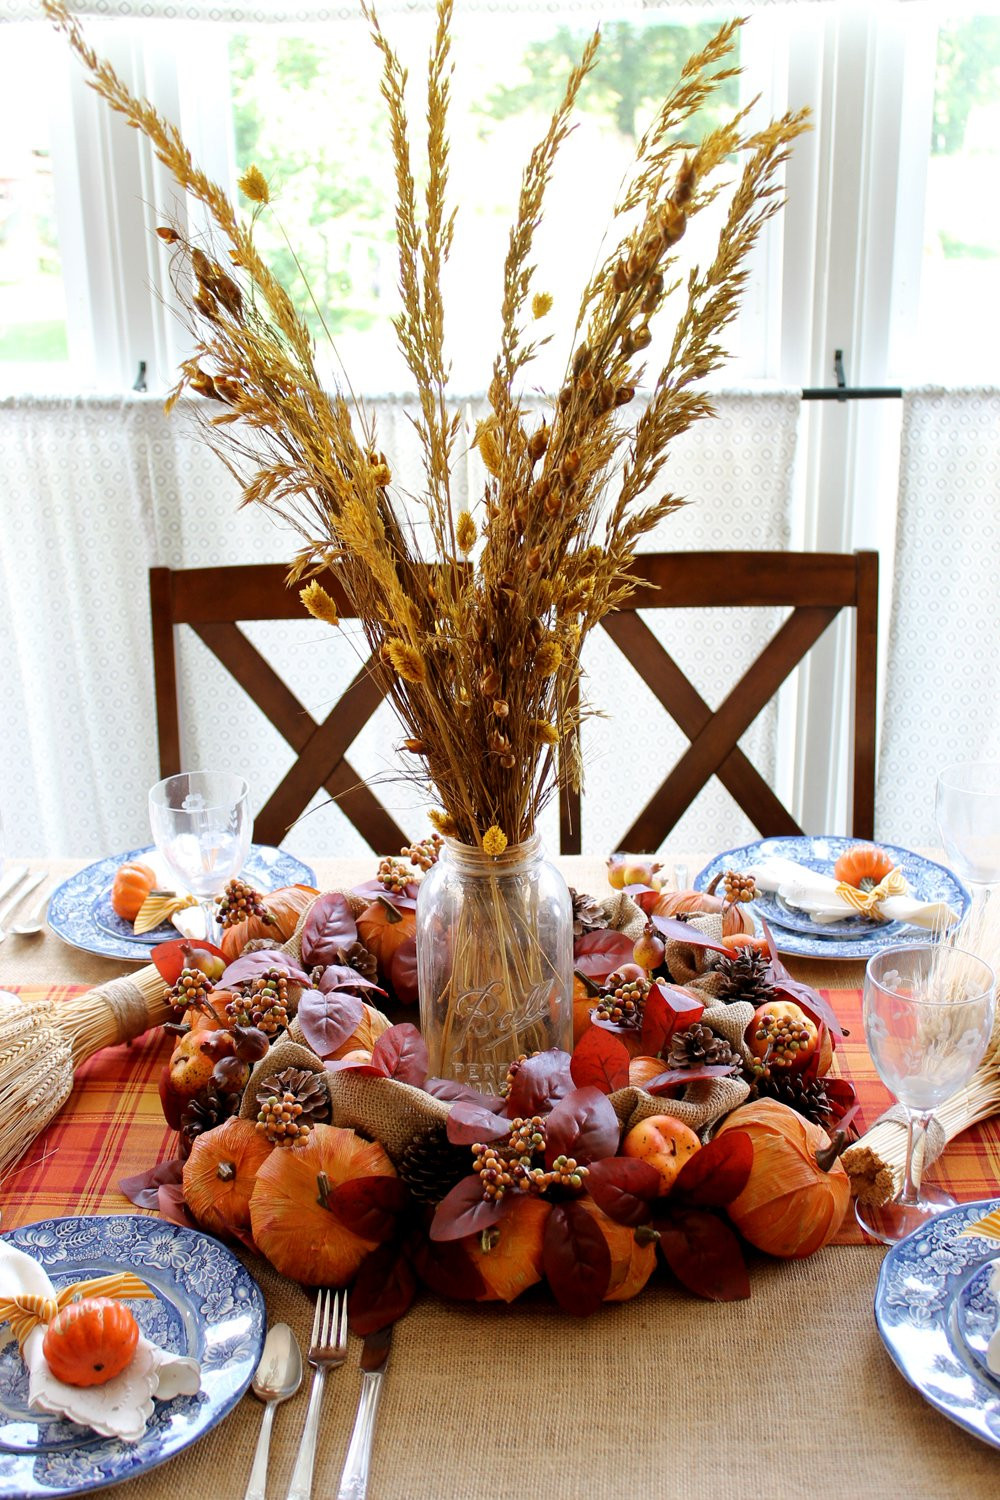 DIY Thanksgiving Decorations Ideas
 DIY Thanksgiving Decorations for Your Table The Country